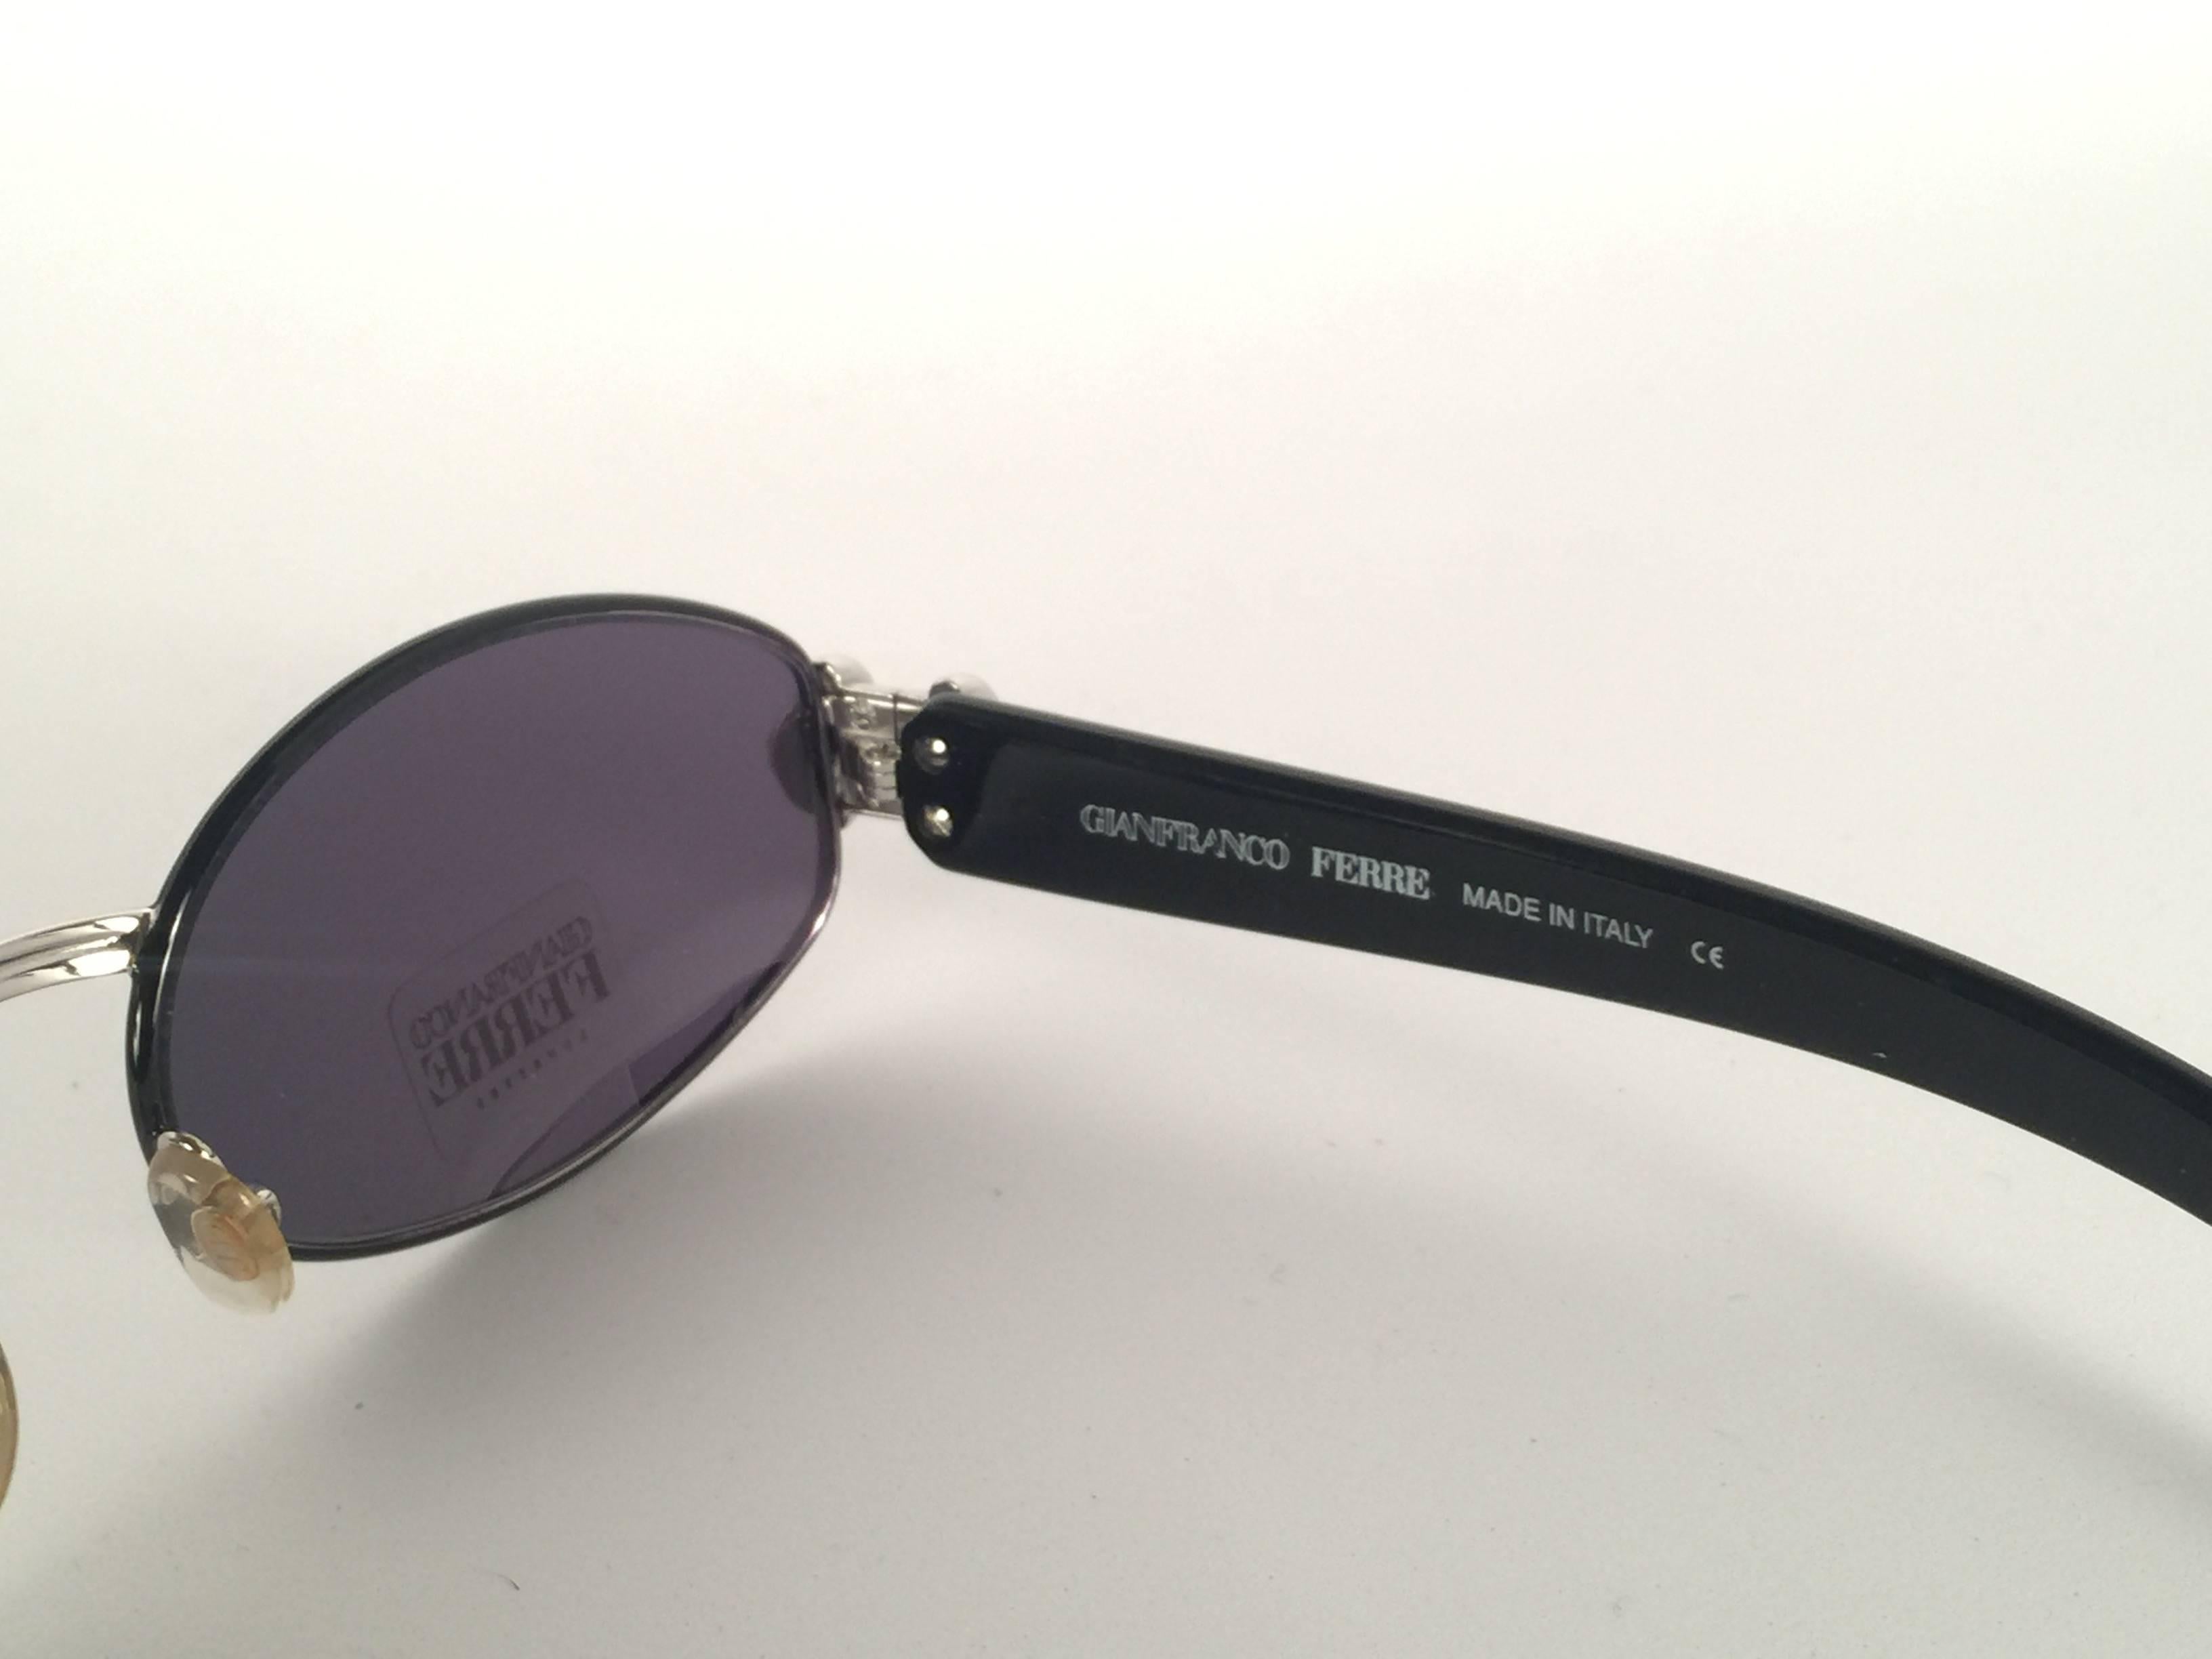 New Vintage Gianfranco Ferre Oval 1990's Made in Italy Sunglasses 1